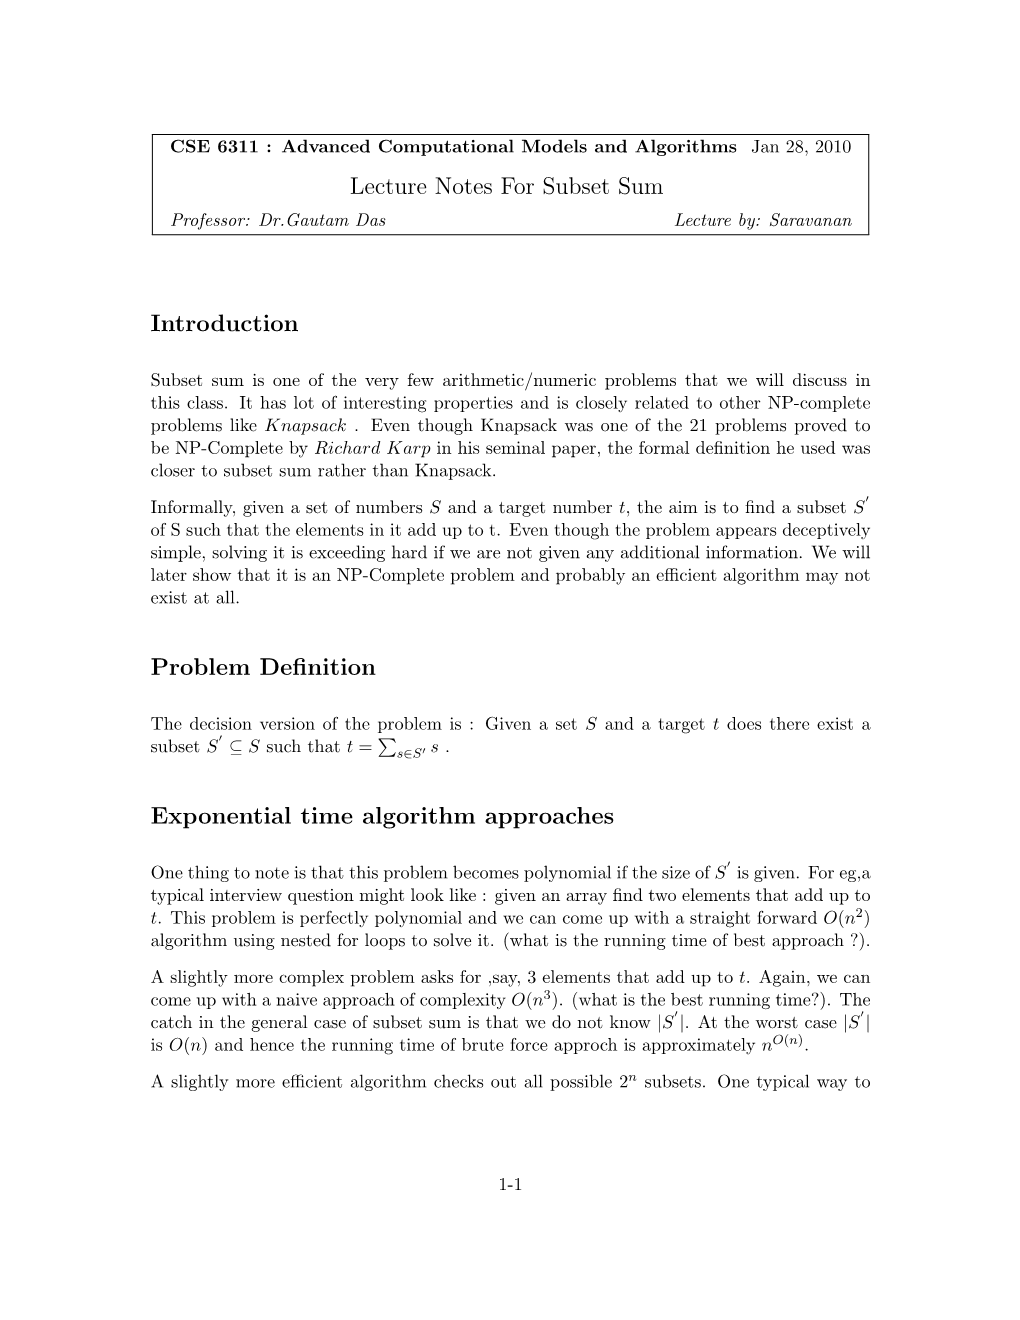 Lecture Notes for Subset Sum Introduction Problem Definition